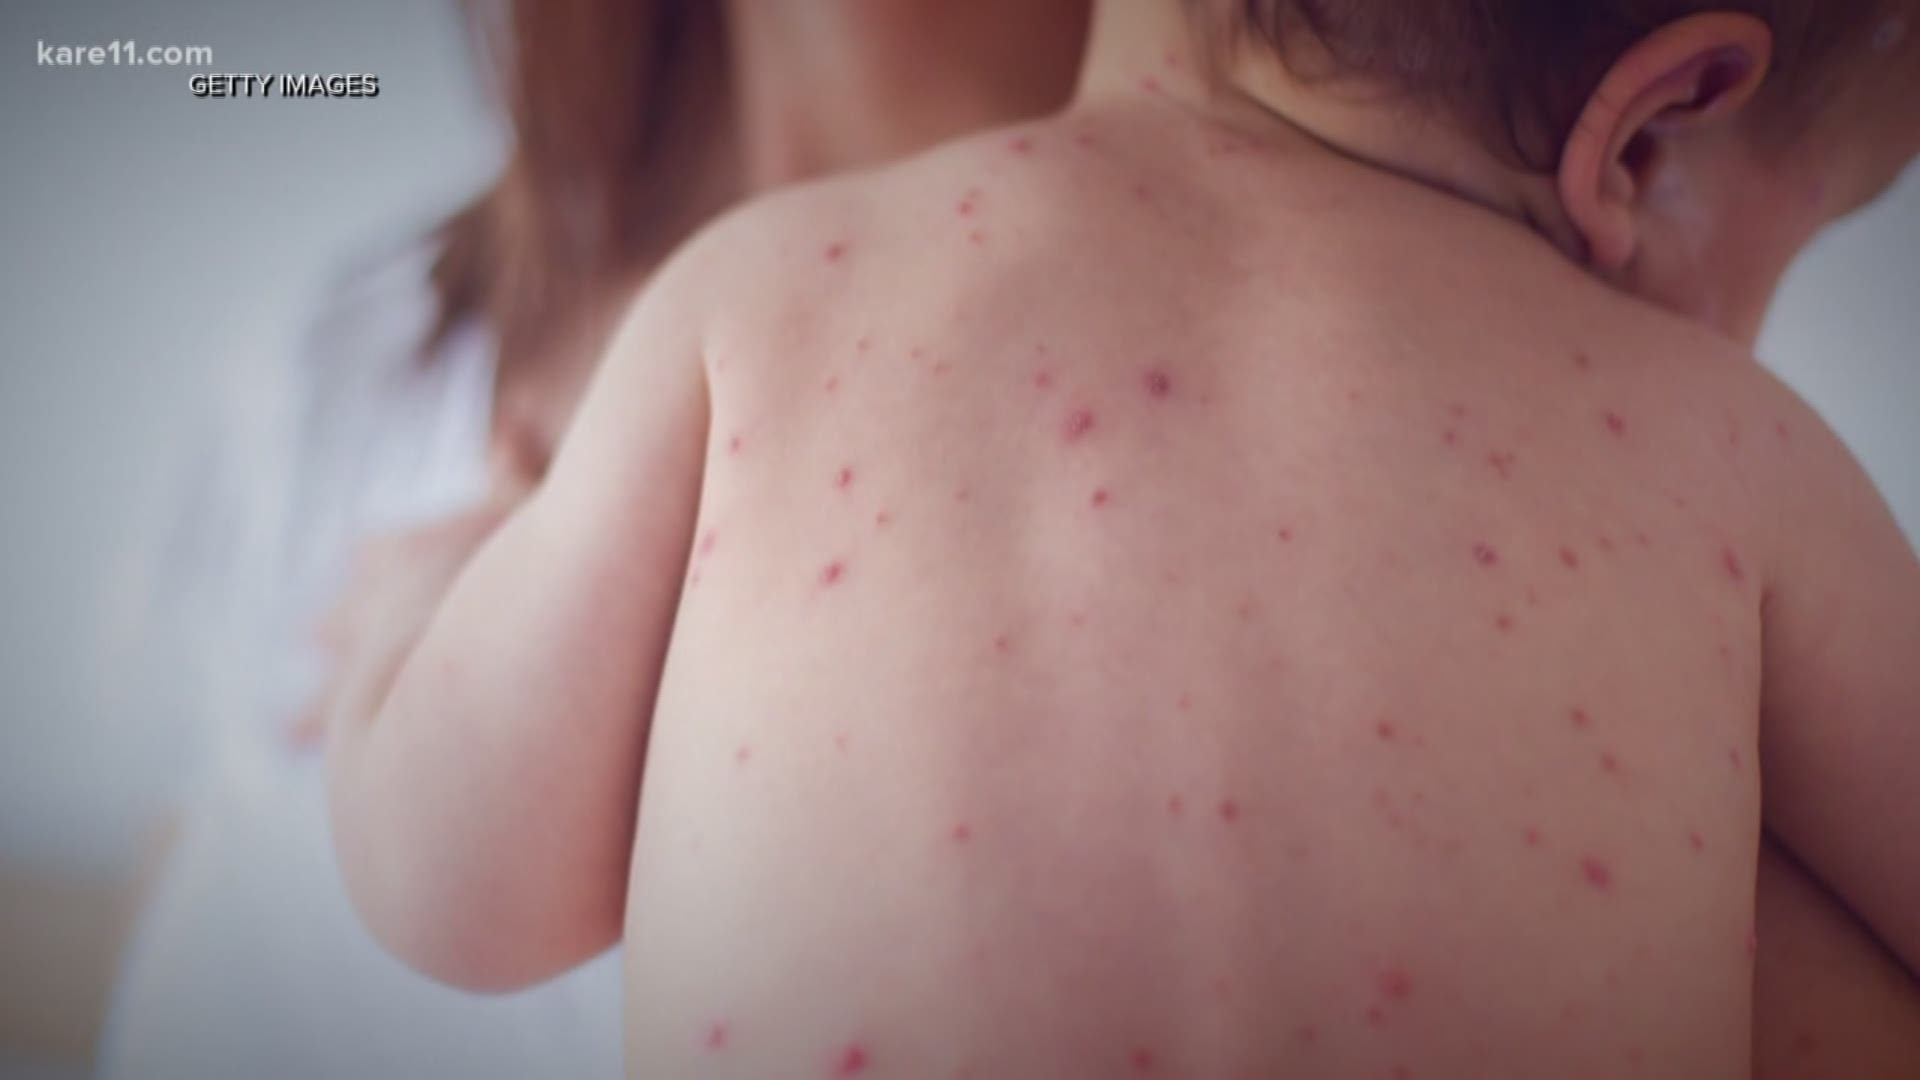 The number of confirmed measles cases in the U.S. has now climbed to 764 – that’s more than double the number a year ago and the highest total in 25 years, according to new numbers released today by the Centers for Disease Control and Prevention.